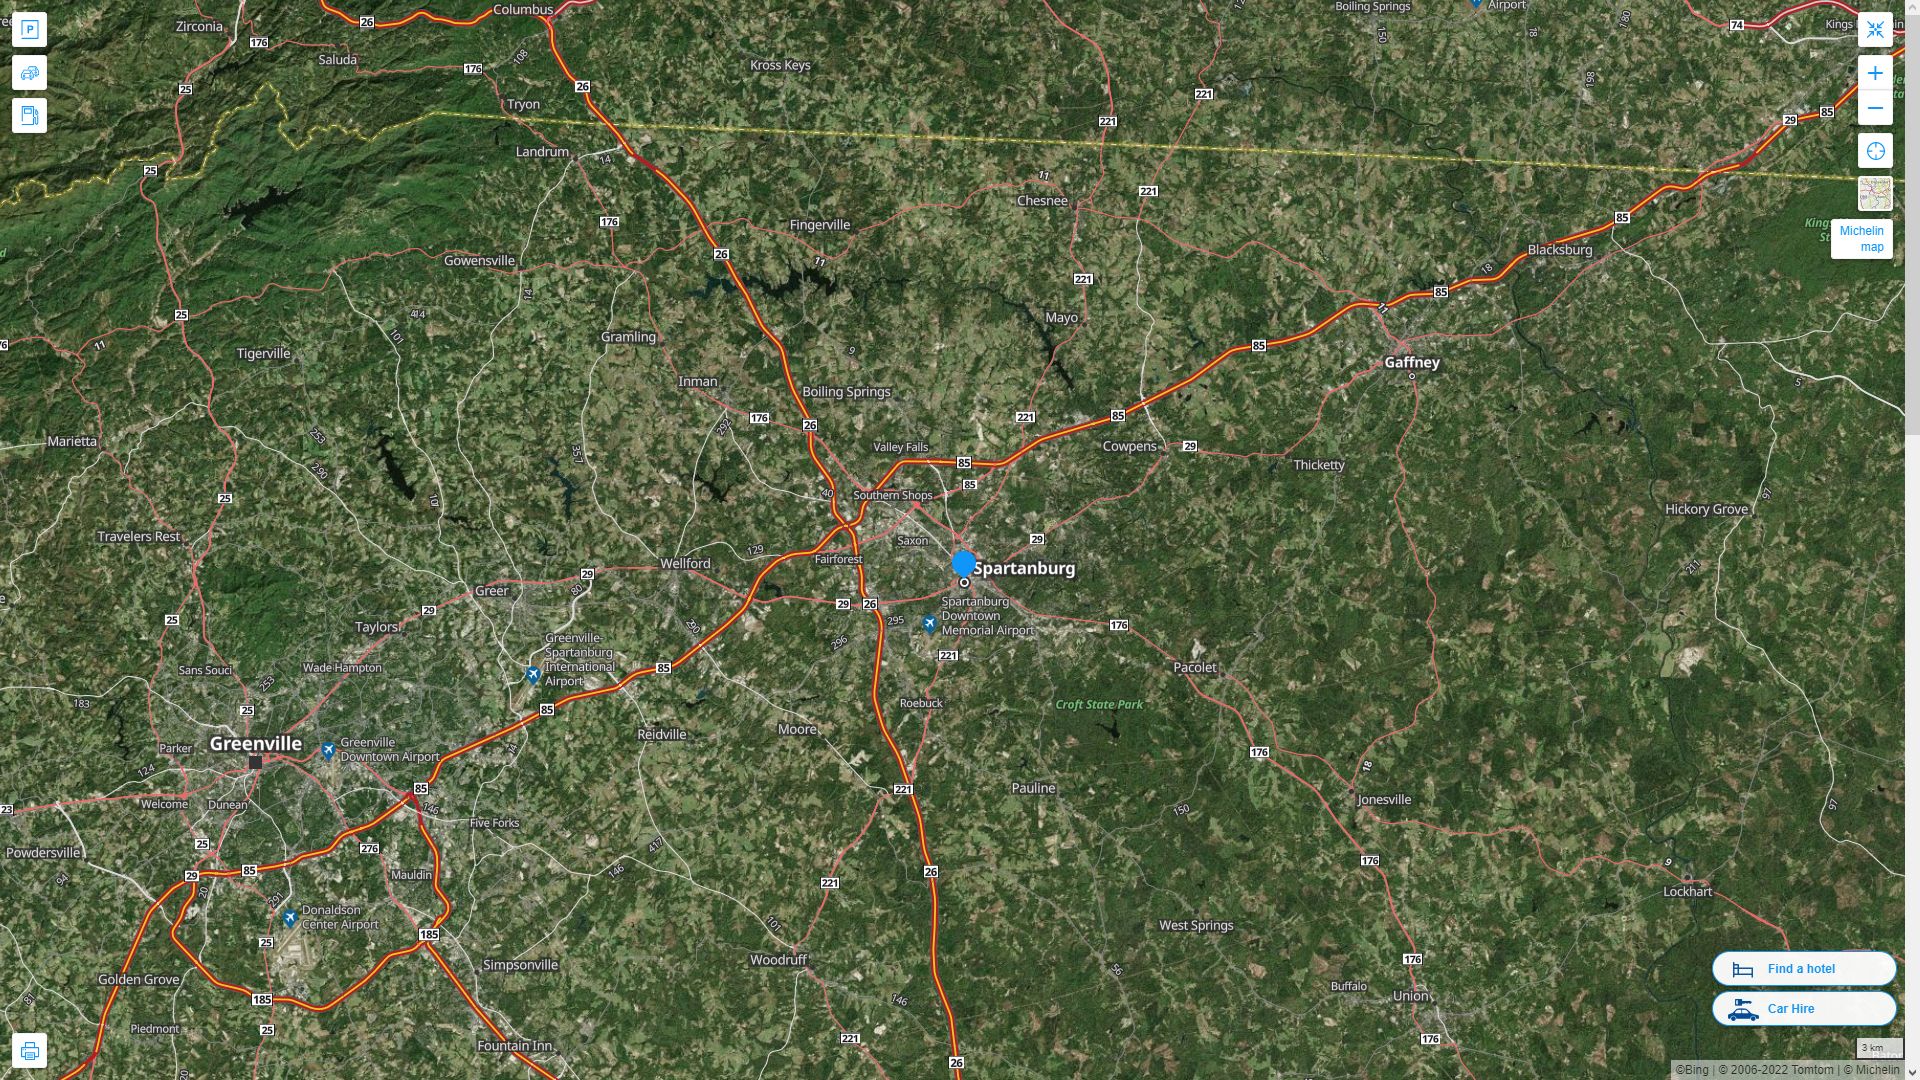 Spartanburg South Carolina Highway and Road Map with Satellite View